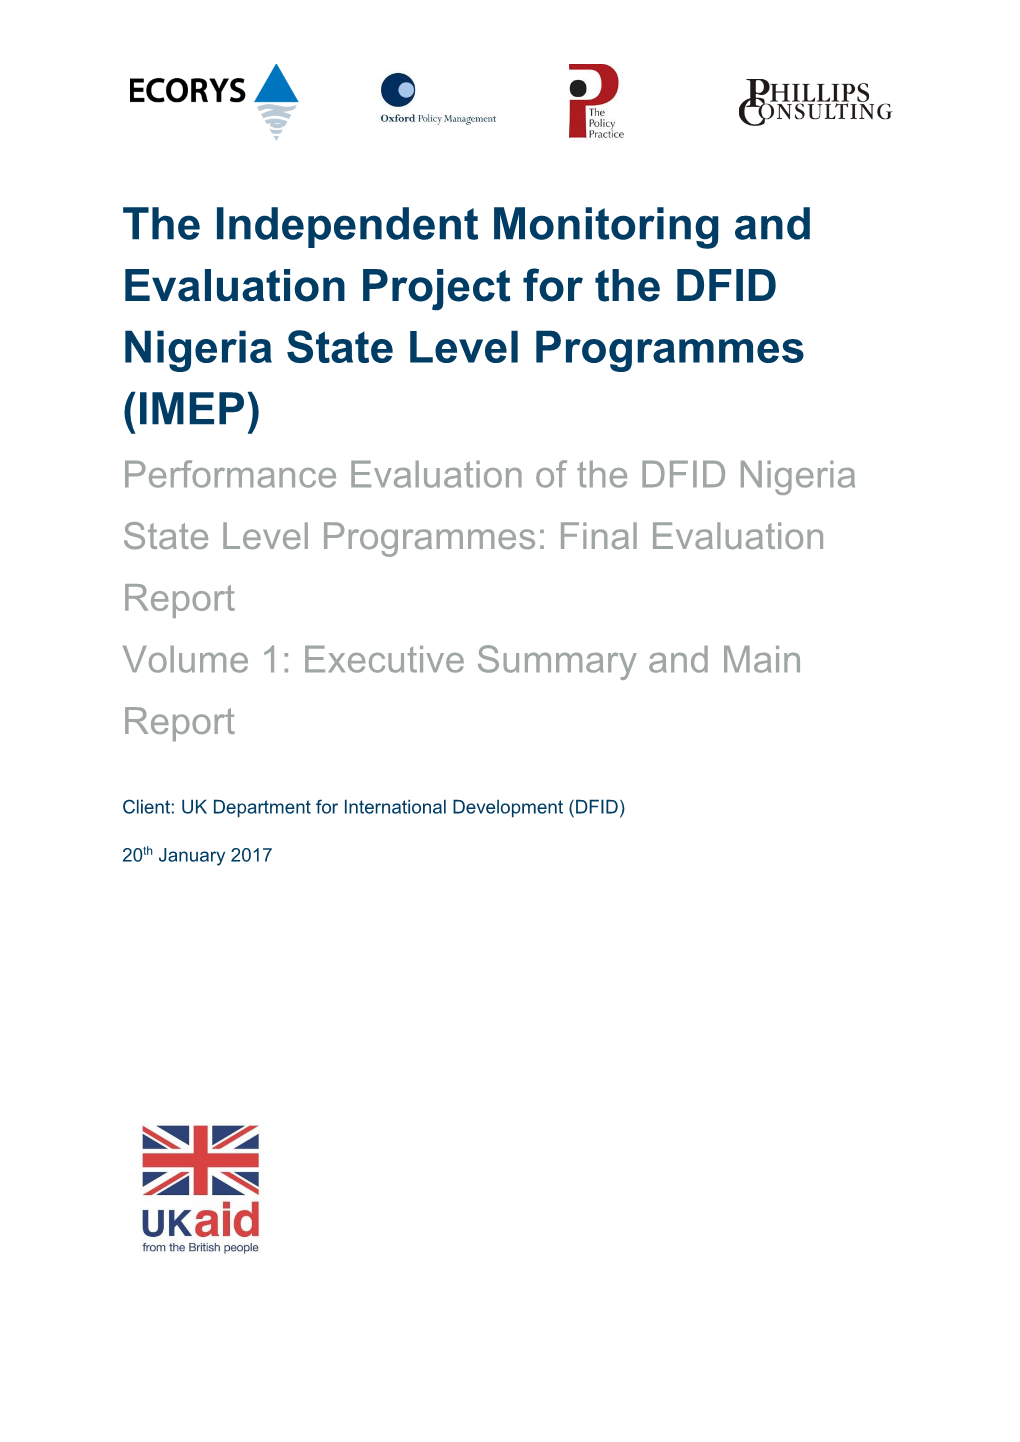 Performance Evaluation of the DFID Nigeria State Level Programmes: Final Evaluation Report Volume 1: Executive Summary and Main Report